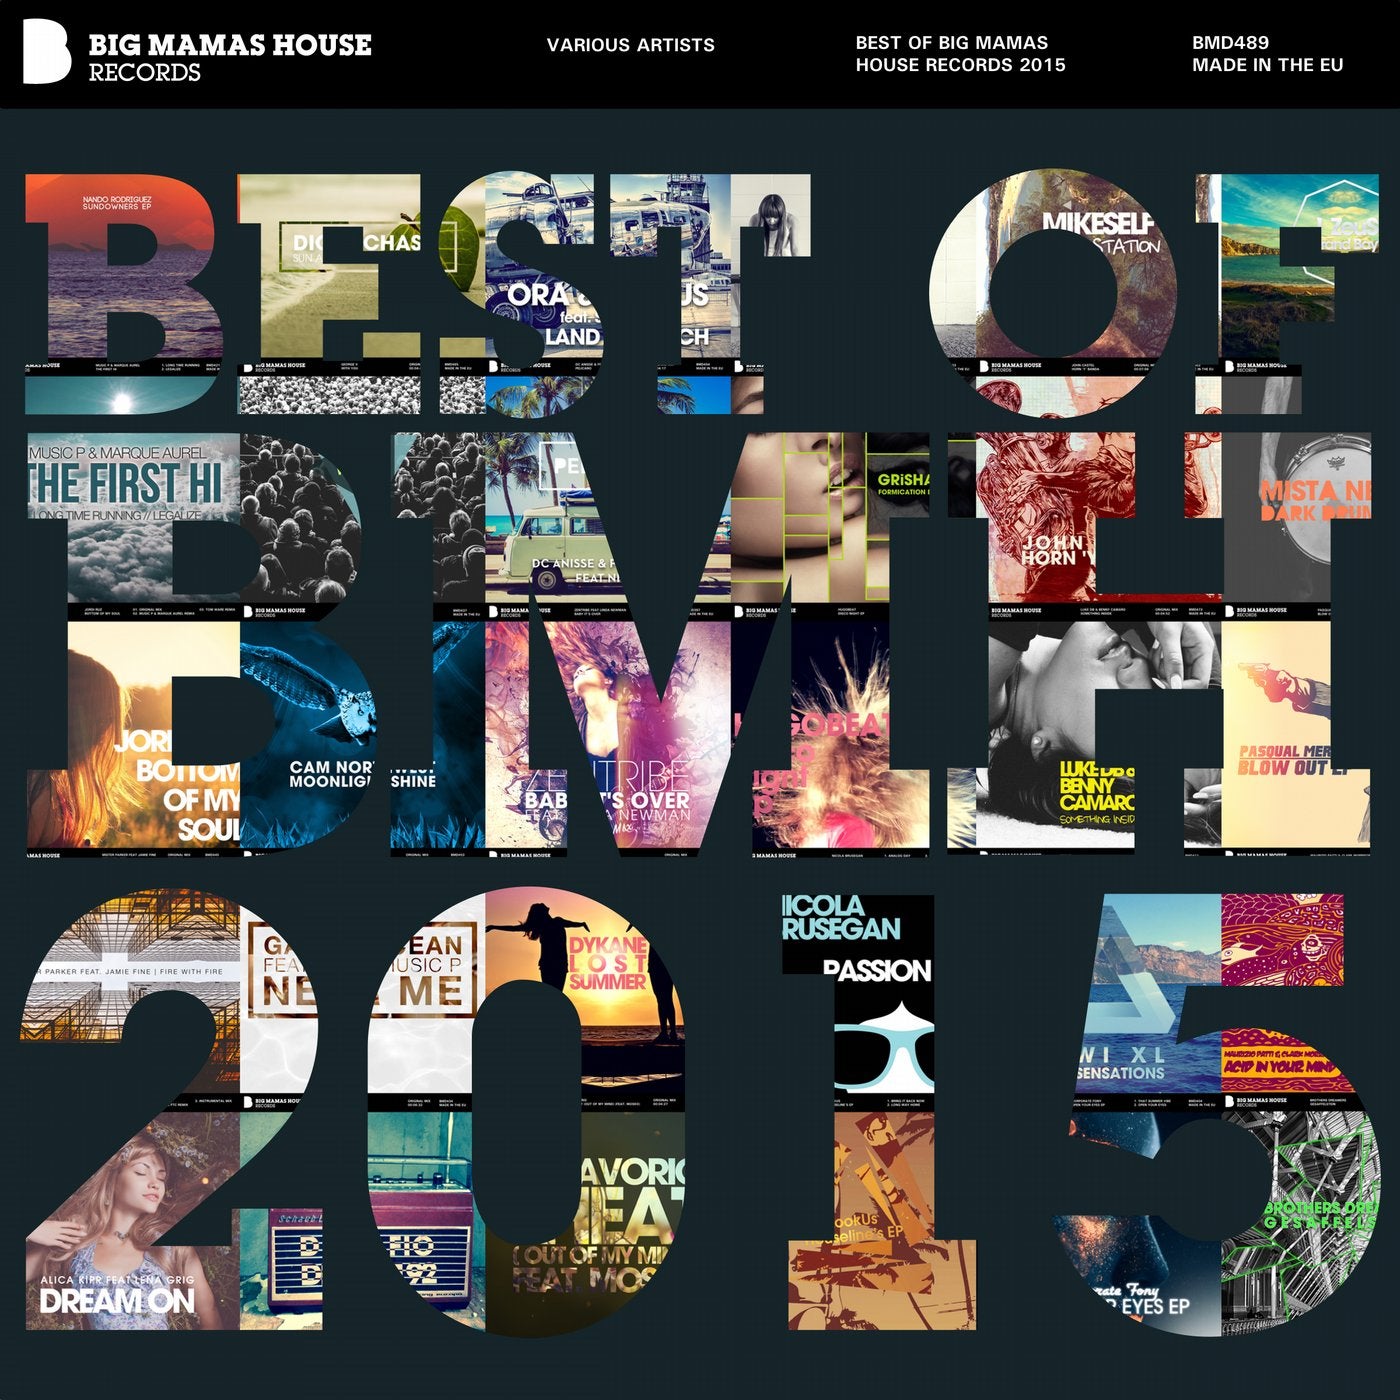 Best of Big Mamas House Records 2015